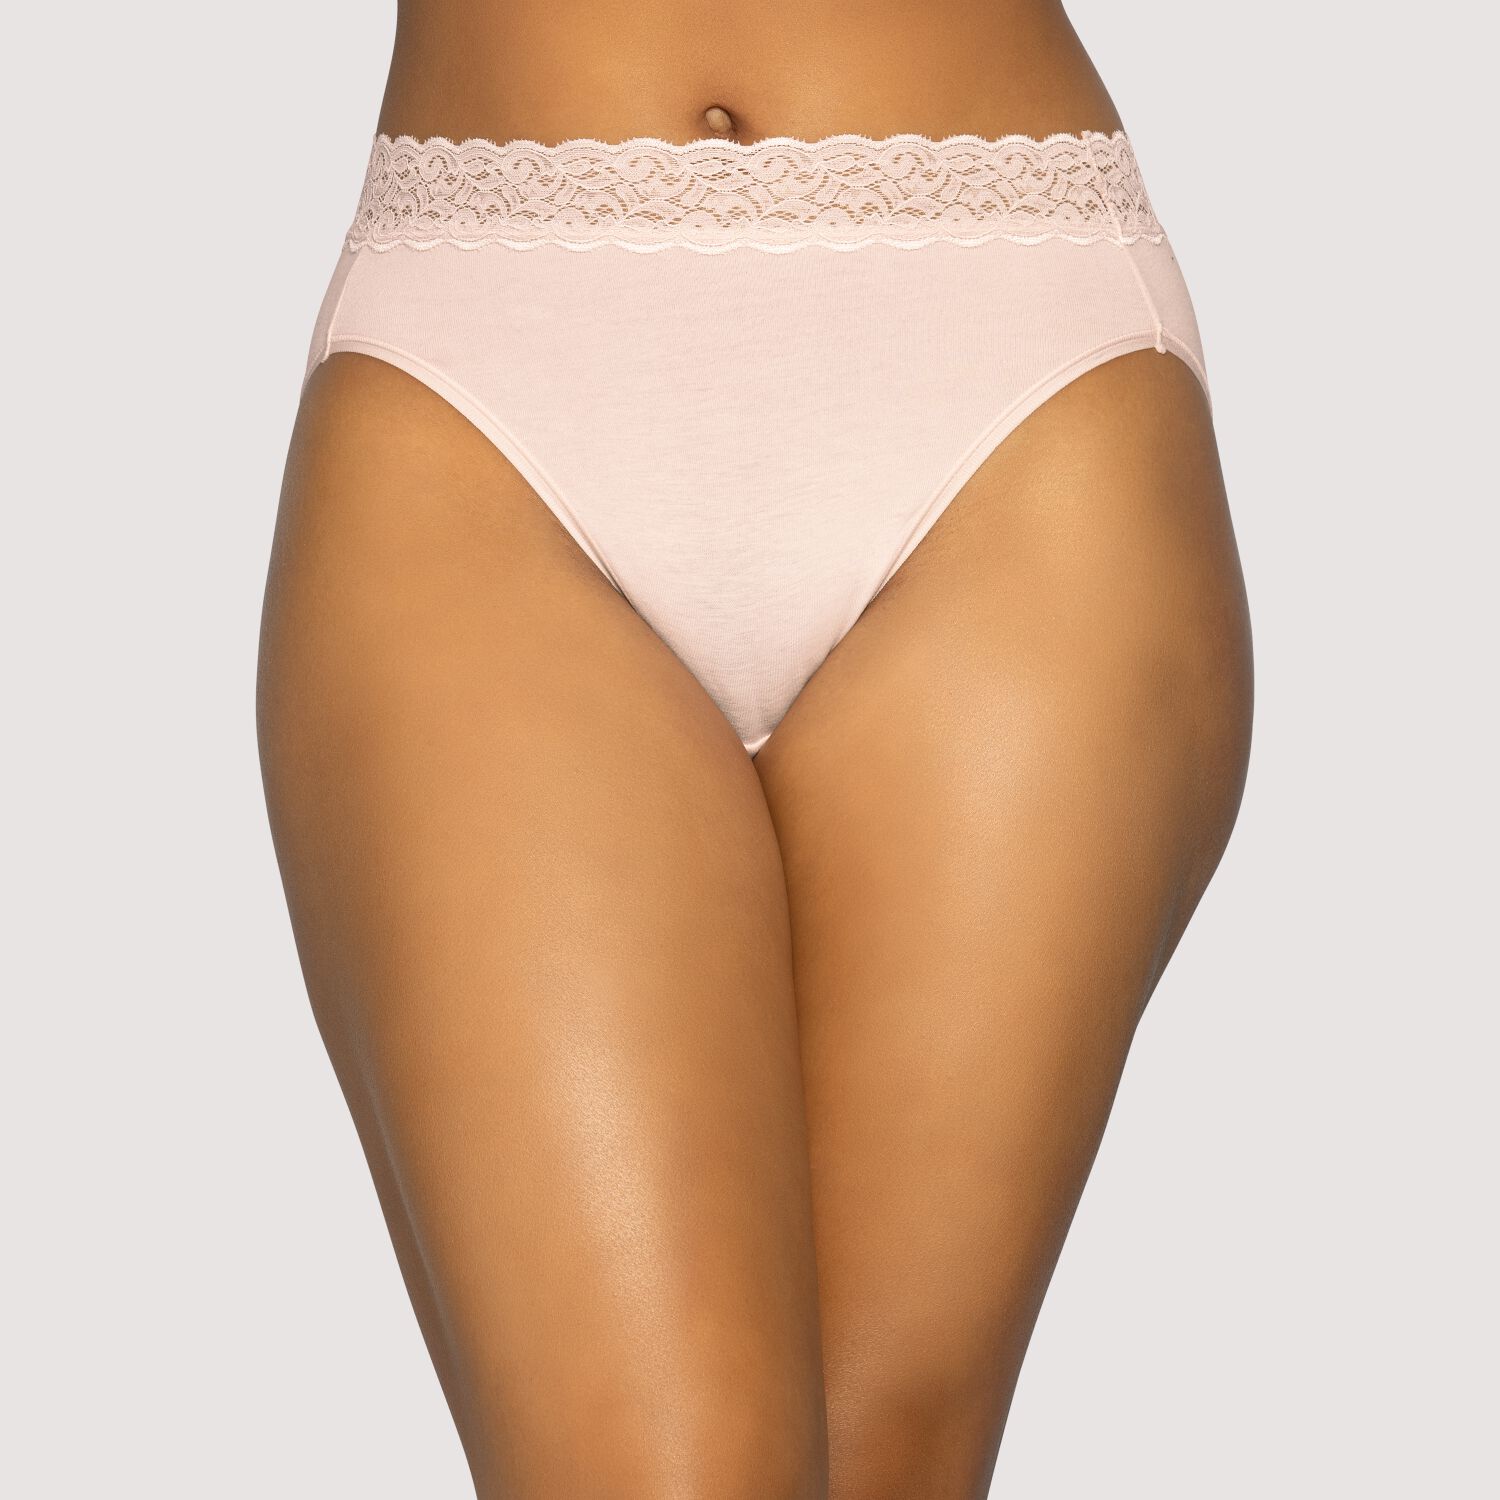 Buy True Meaning Comfortable Sexy Lingerie See Through Lace